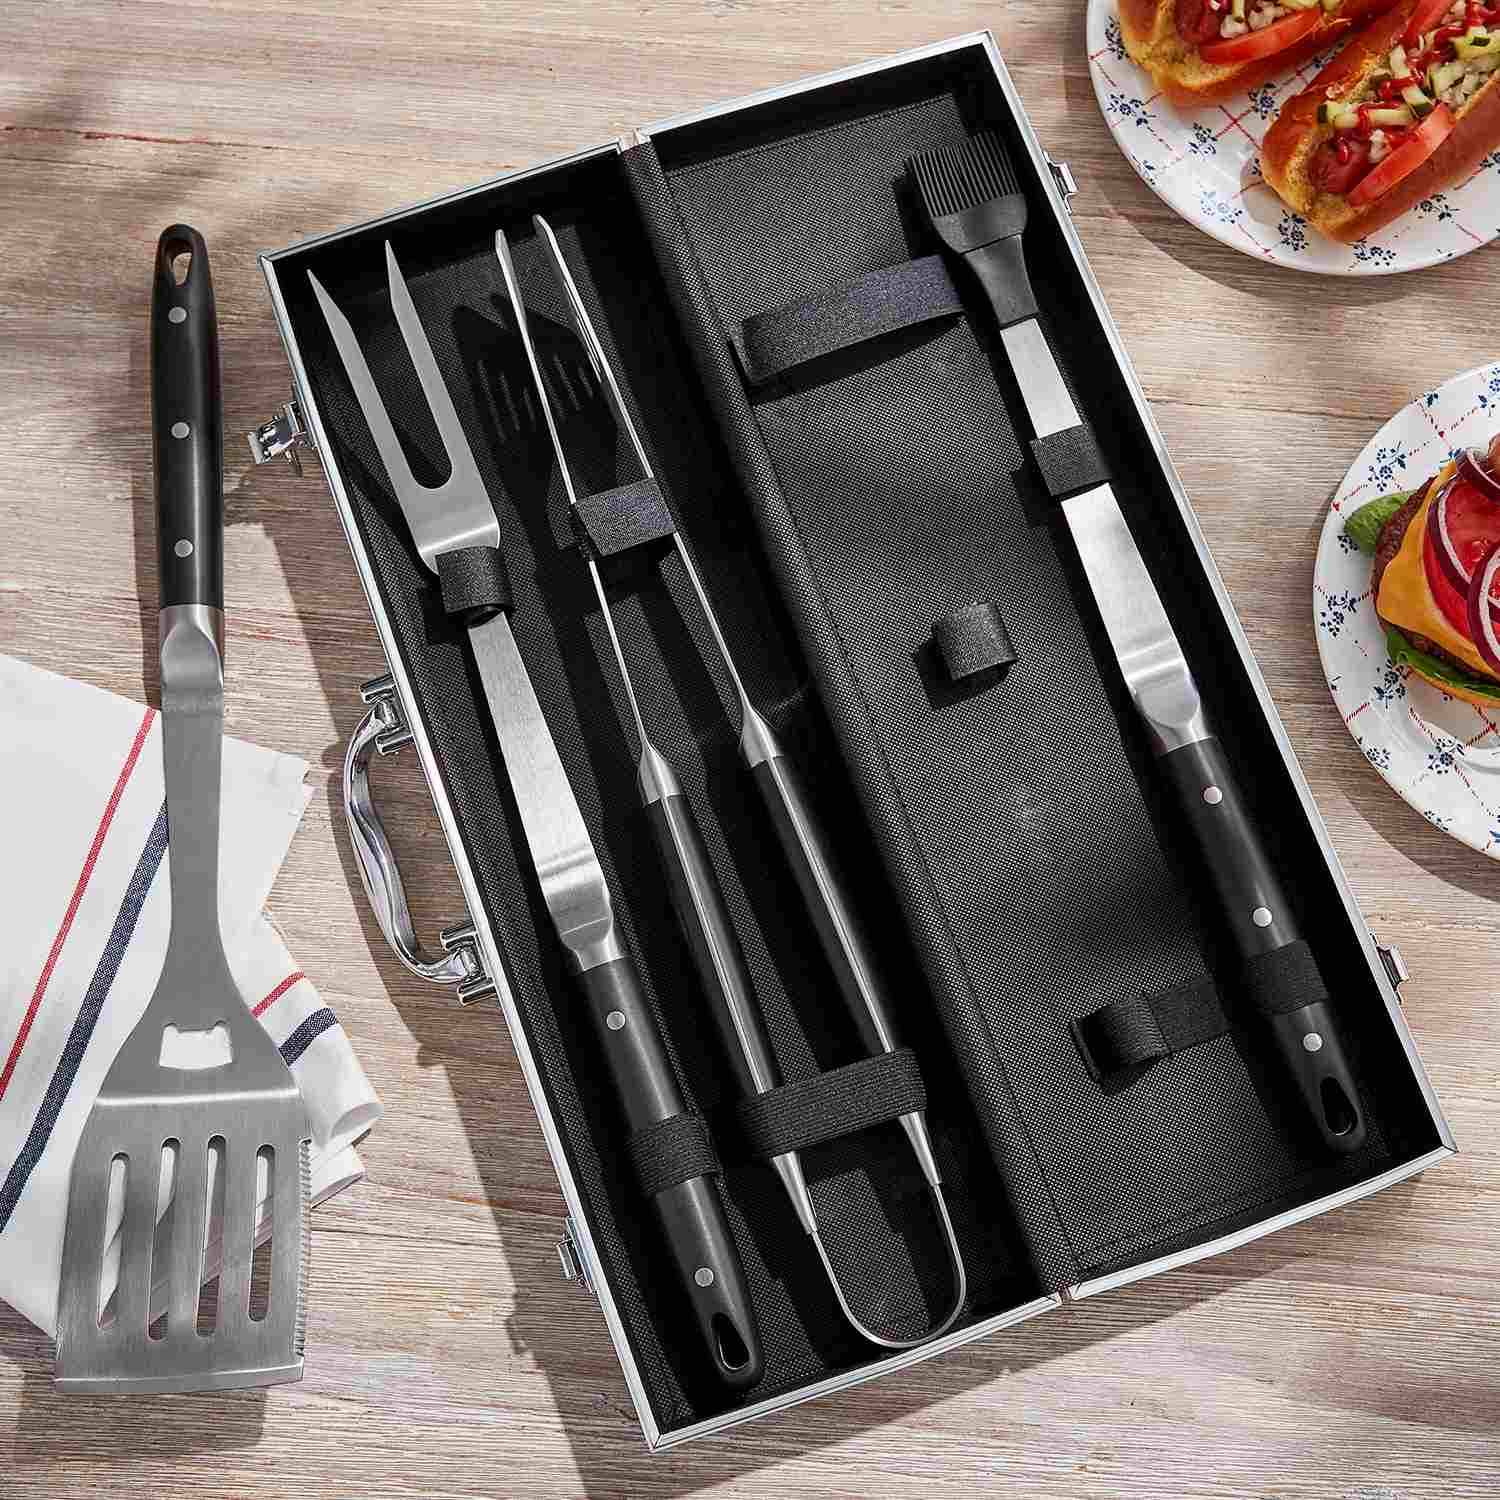 2023 holiday gift guide, gifts for grillers, bbq tool sets